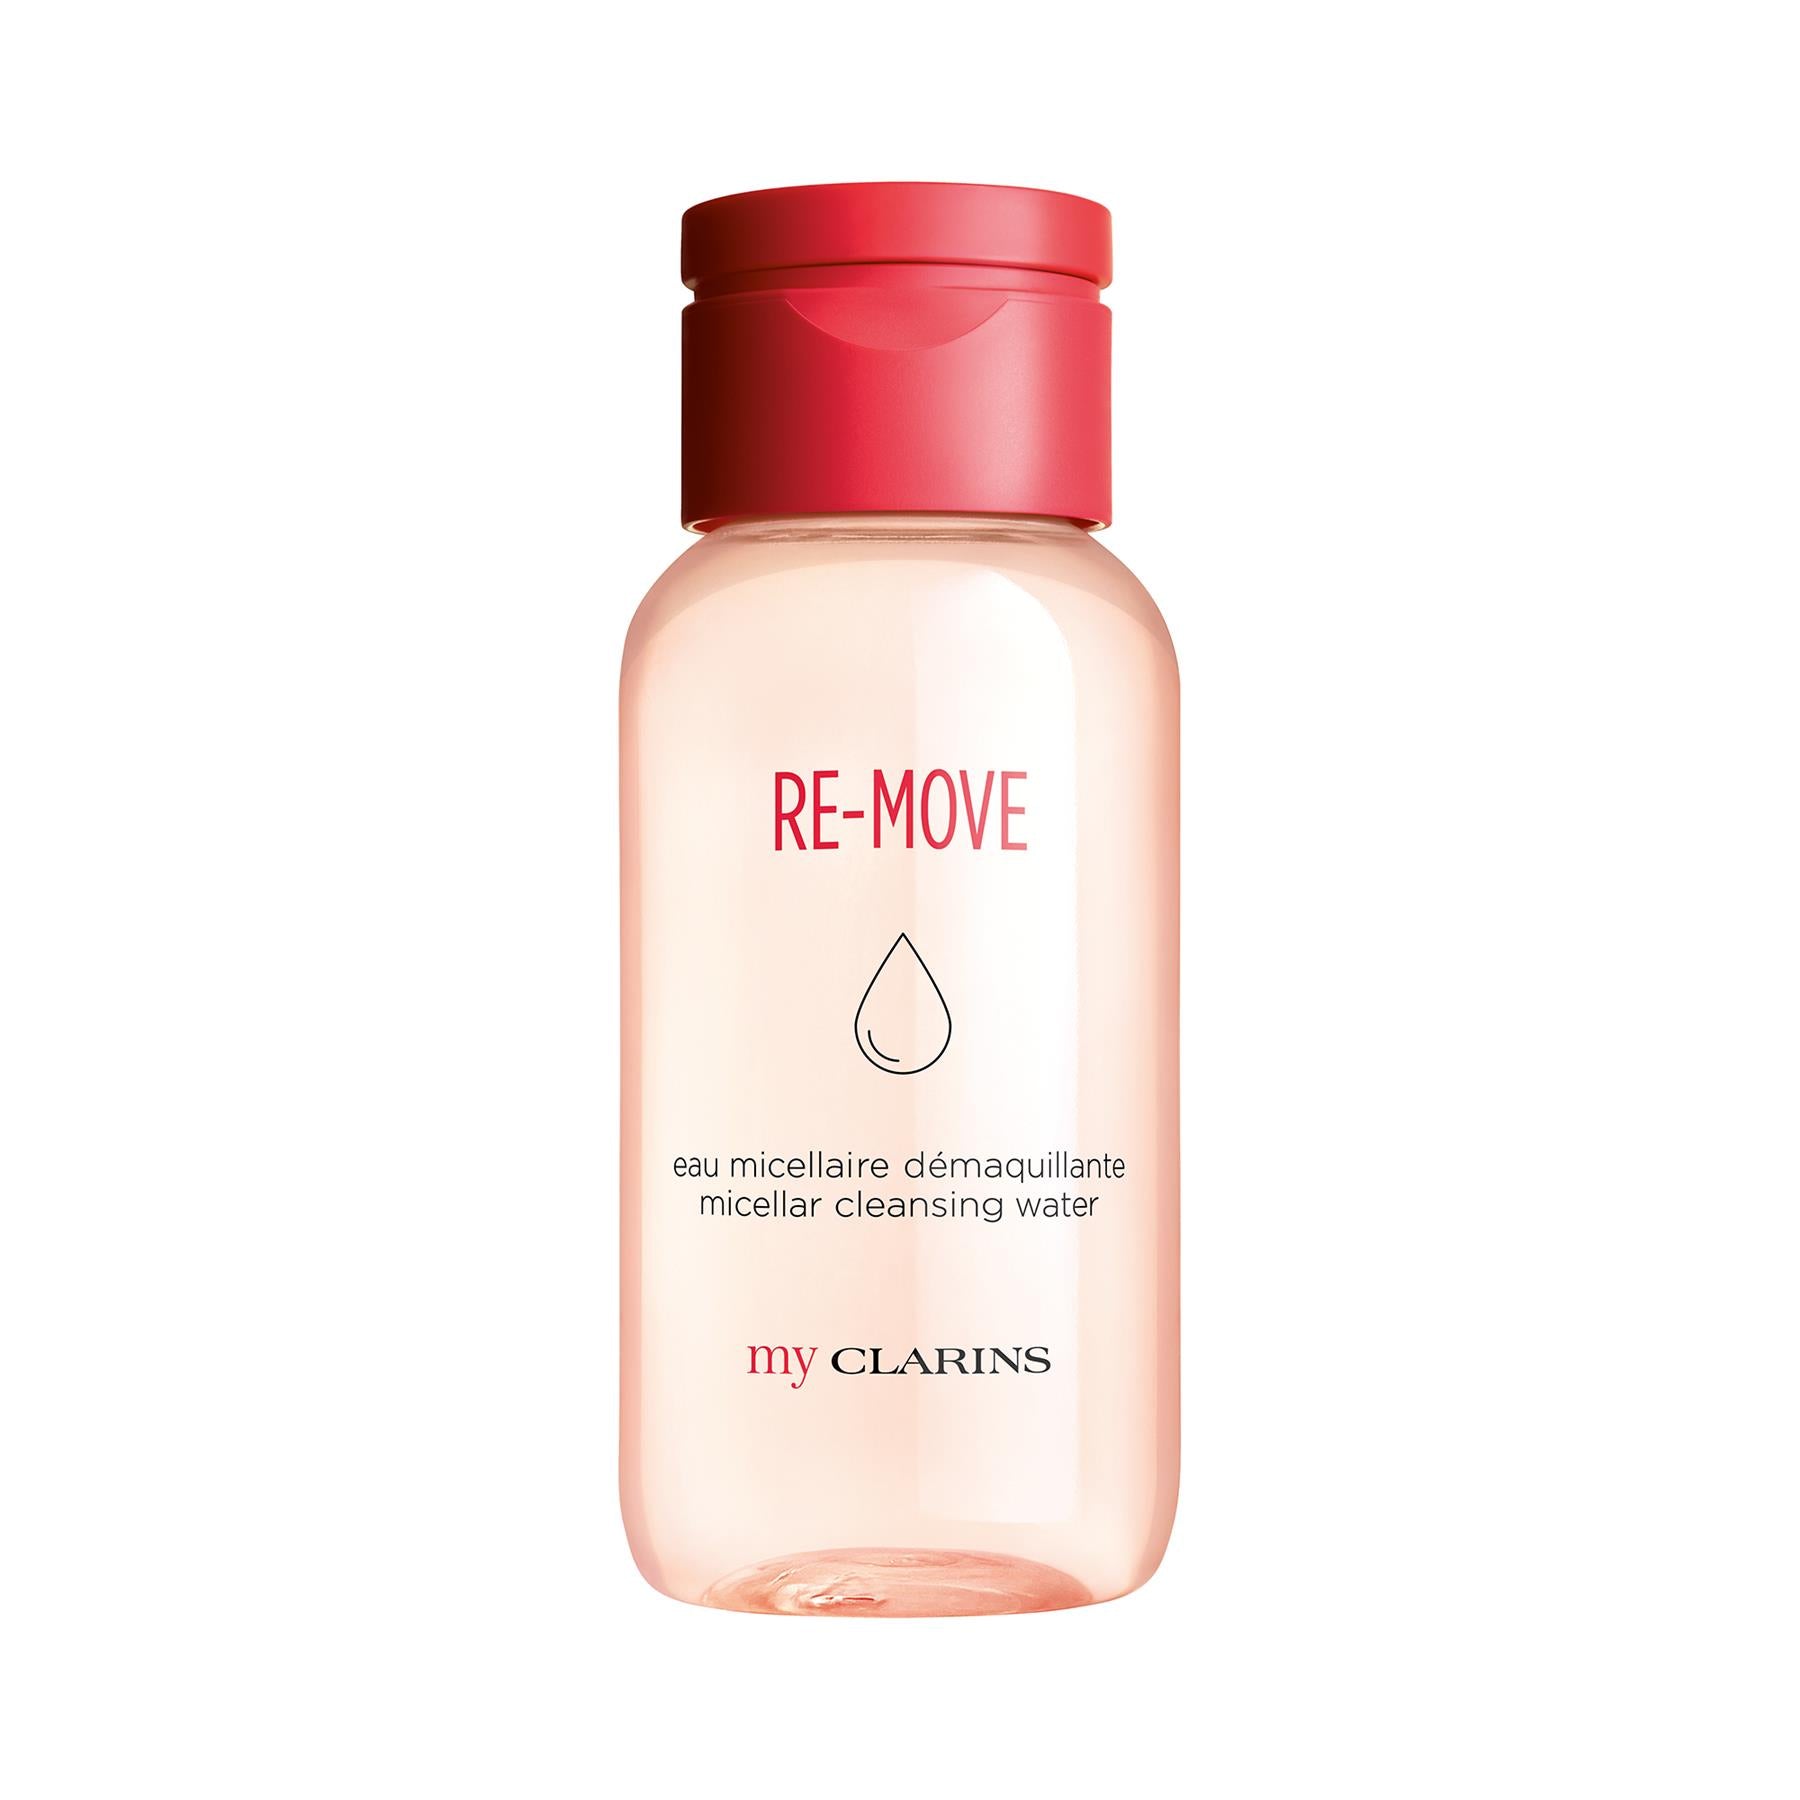 Clarins My Clarins RE-MOVE Micellar Cleansing Water Image